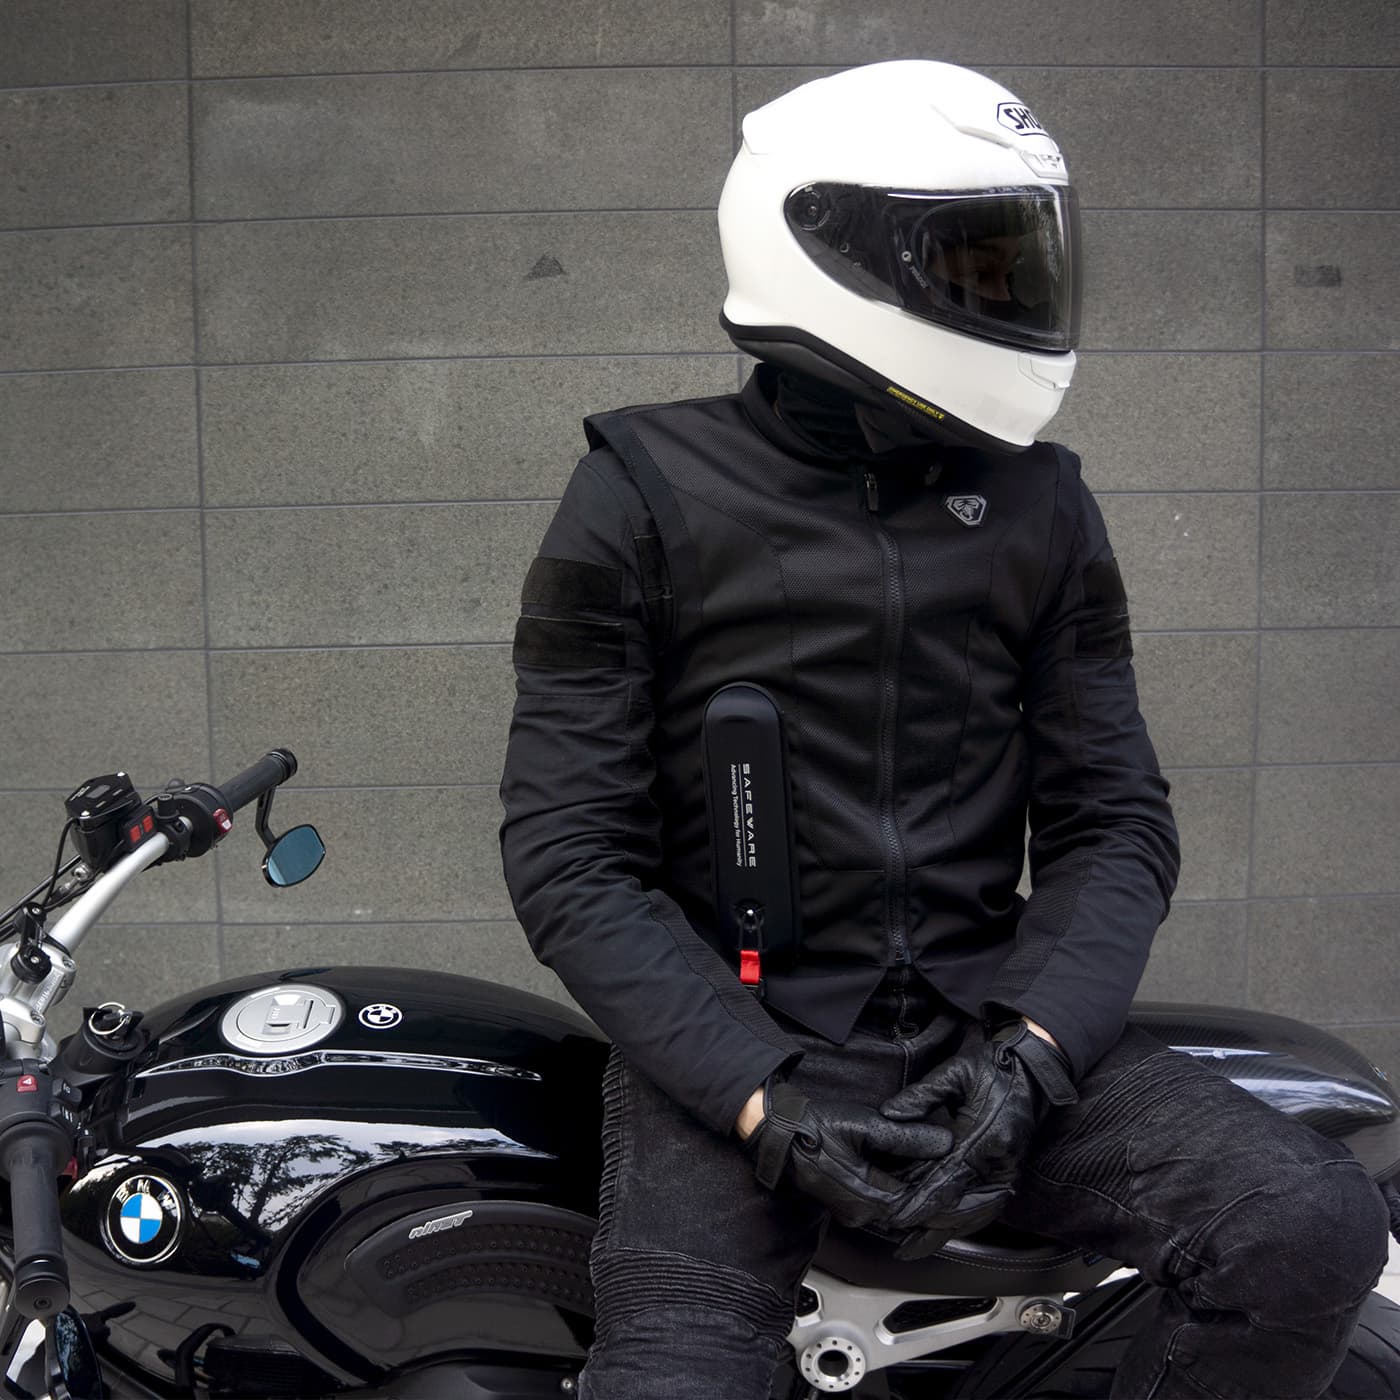 Wearable Airbag for Motorcyclists